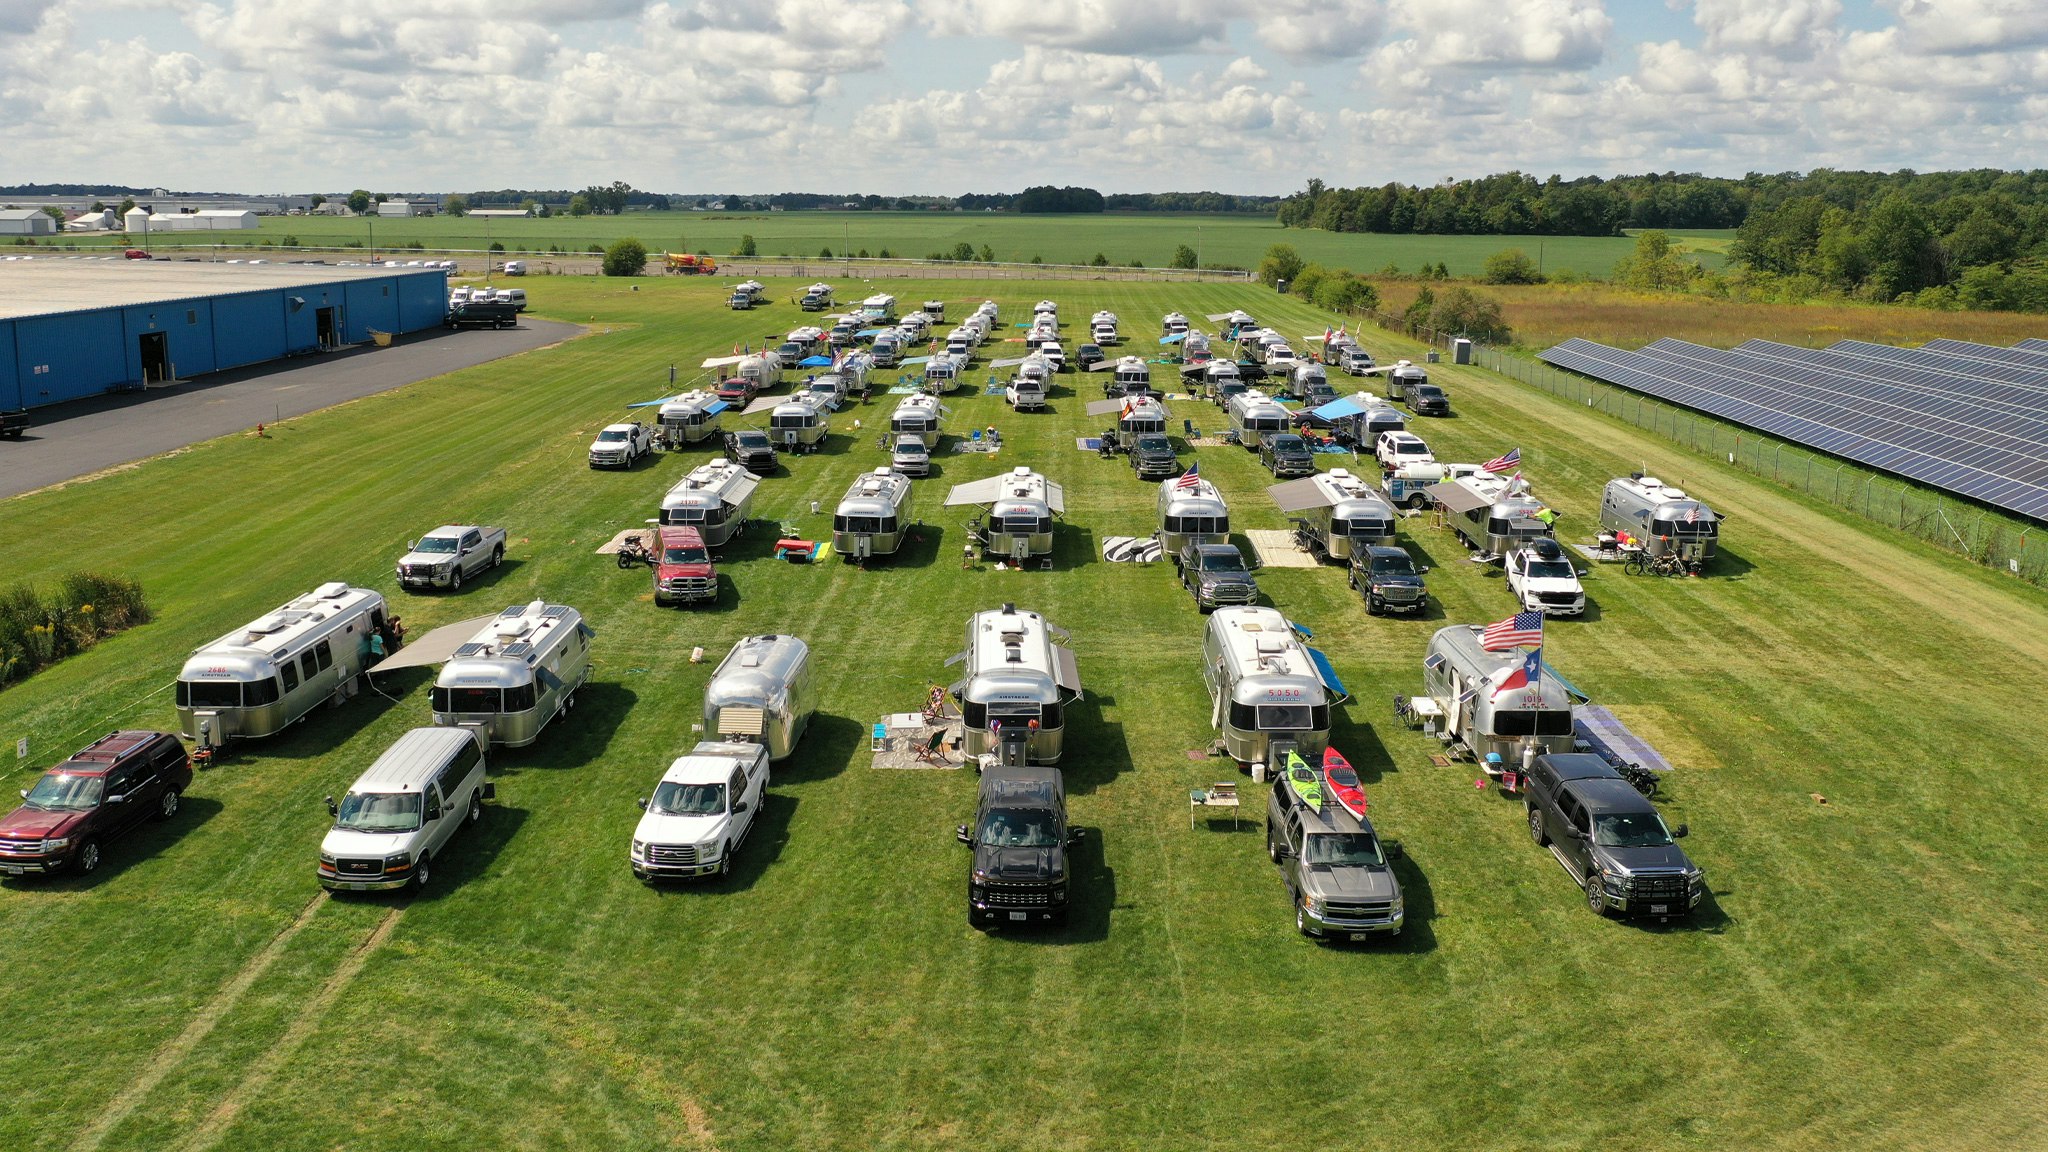 Many Airstream Travel Trailers and Touring Coaches parked at Airstream Headquarters during Alumapalooza in Jackson Center, Ohio.